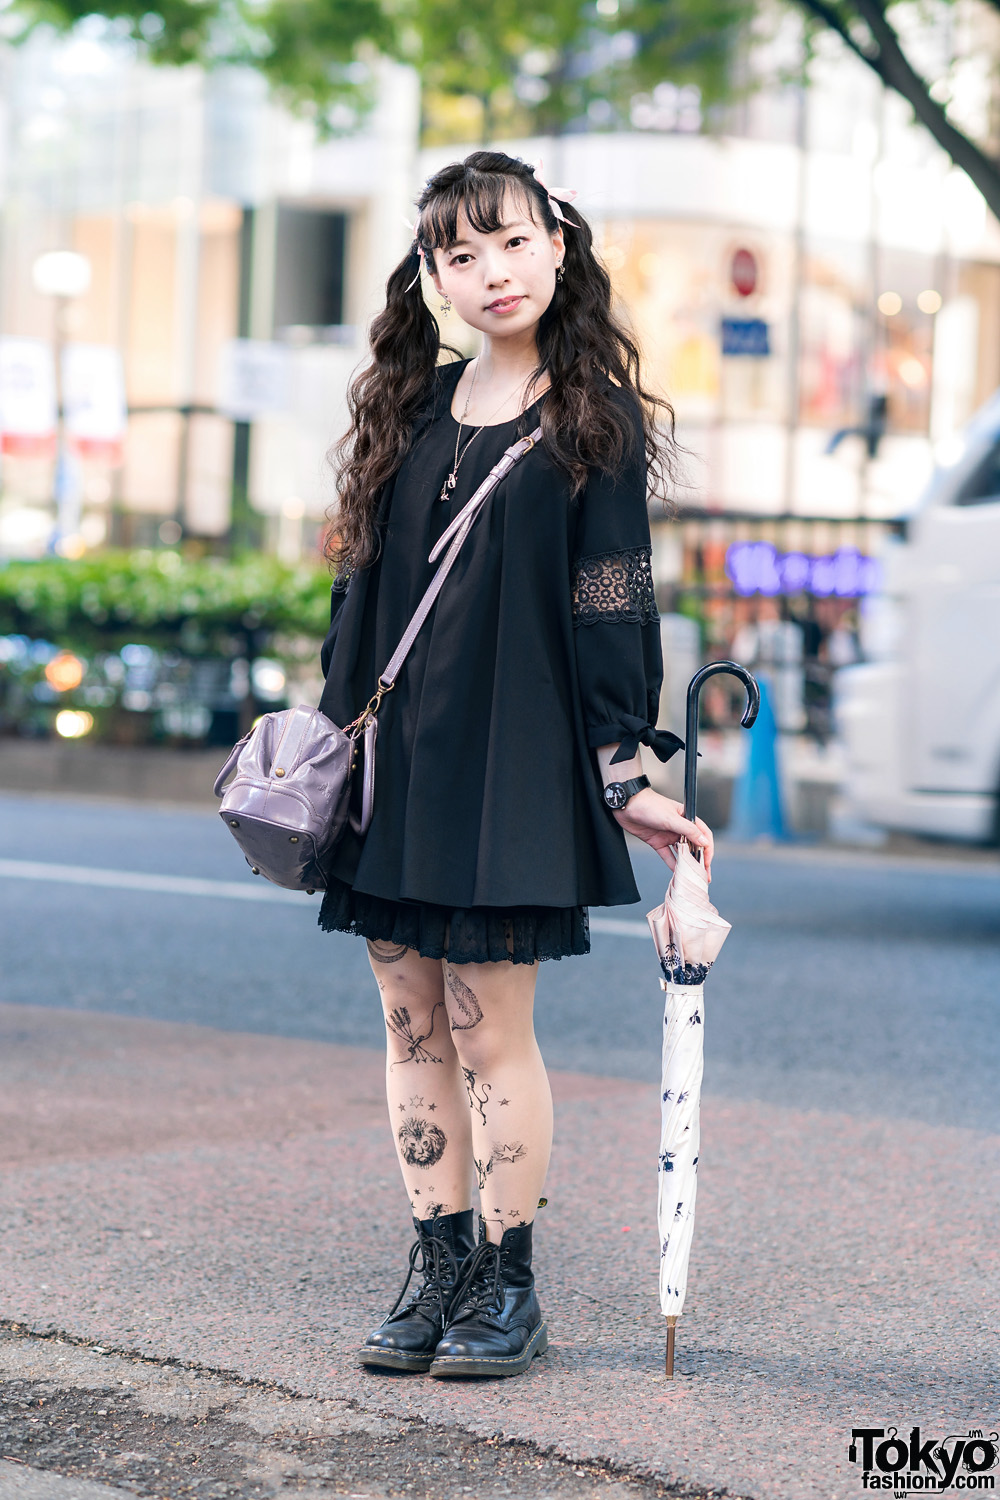 Twin Tails, Digital Print Sheer Stockings, Flared Blouse, Lace Skirt, Anna Sui Bag & Dr. Martens Boots in Harajuku